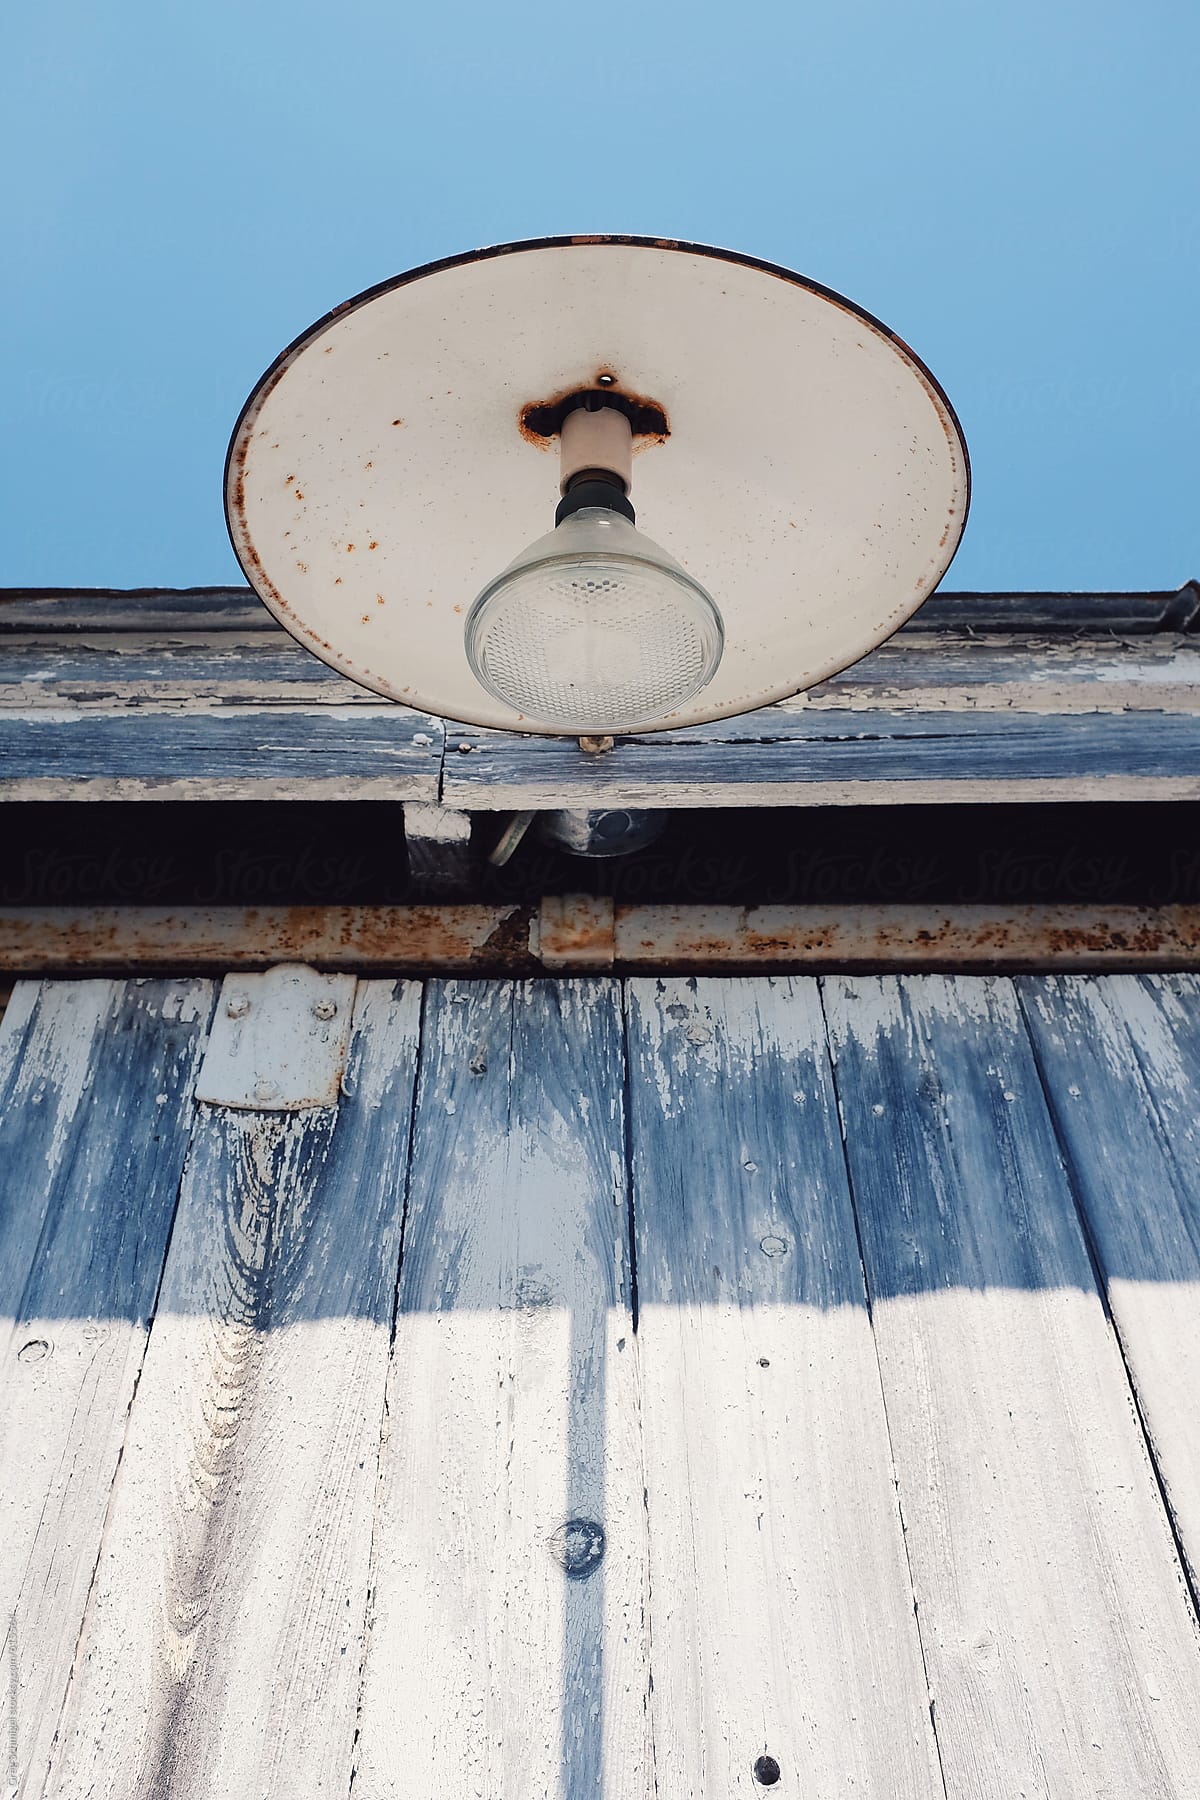 An old lamp, shade and light mounted on the side of an abandoned building